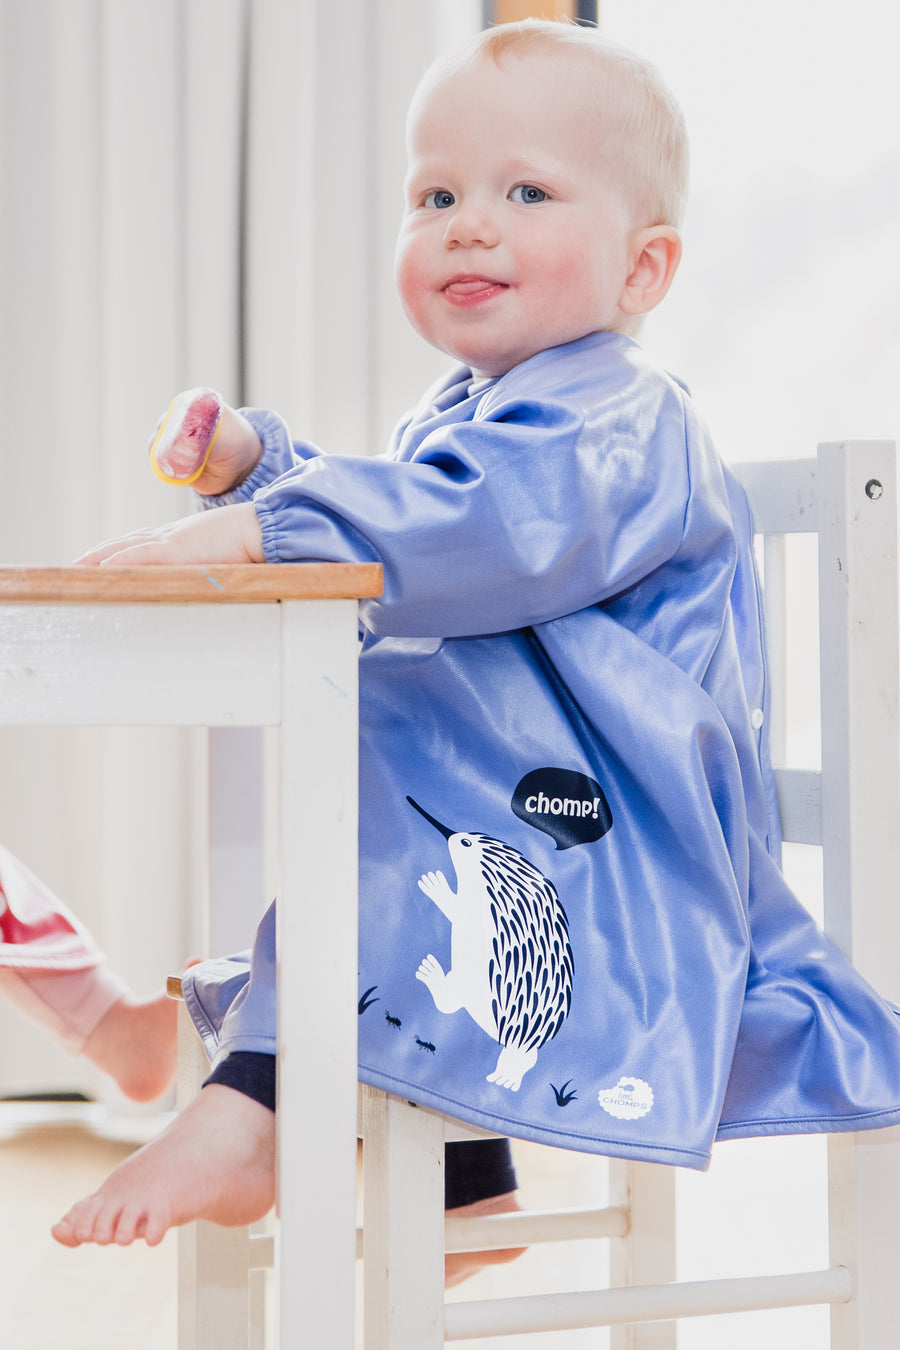 Little Chomps Smock 8 months - 2 years (long sleeve)